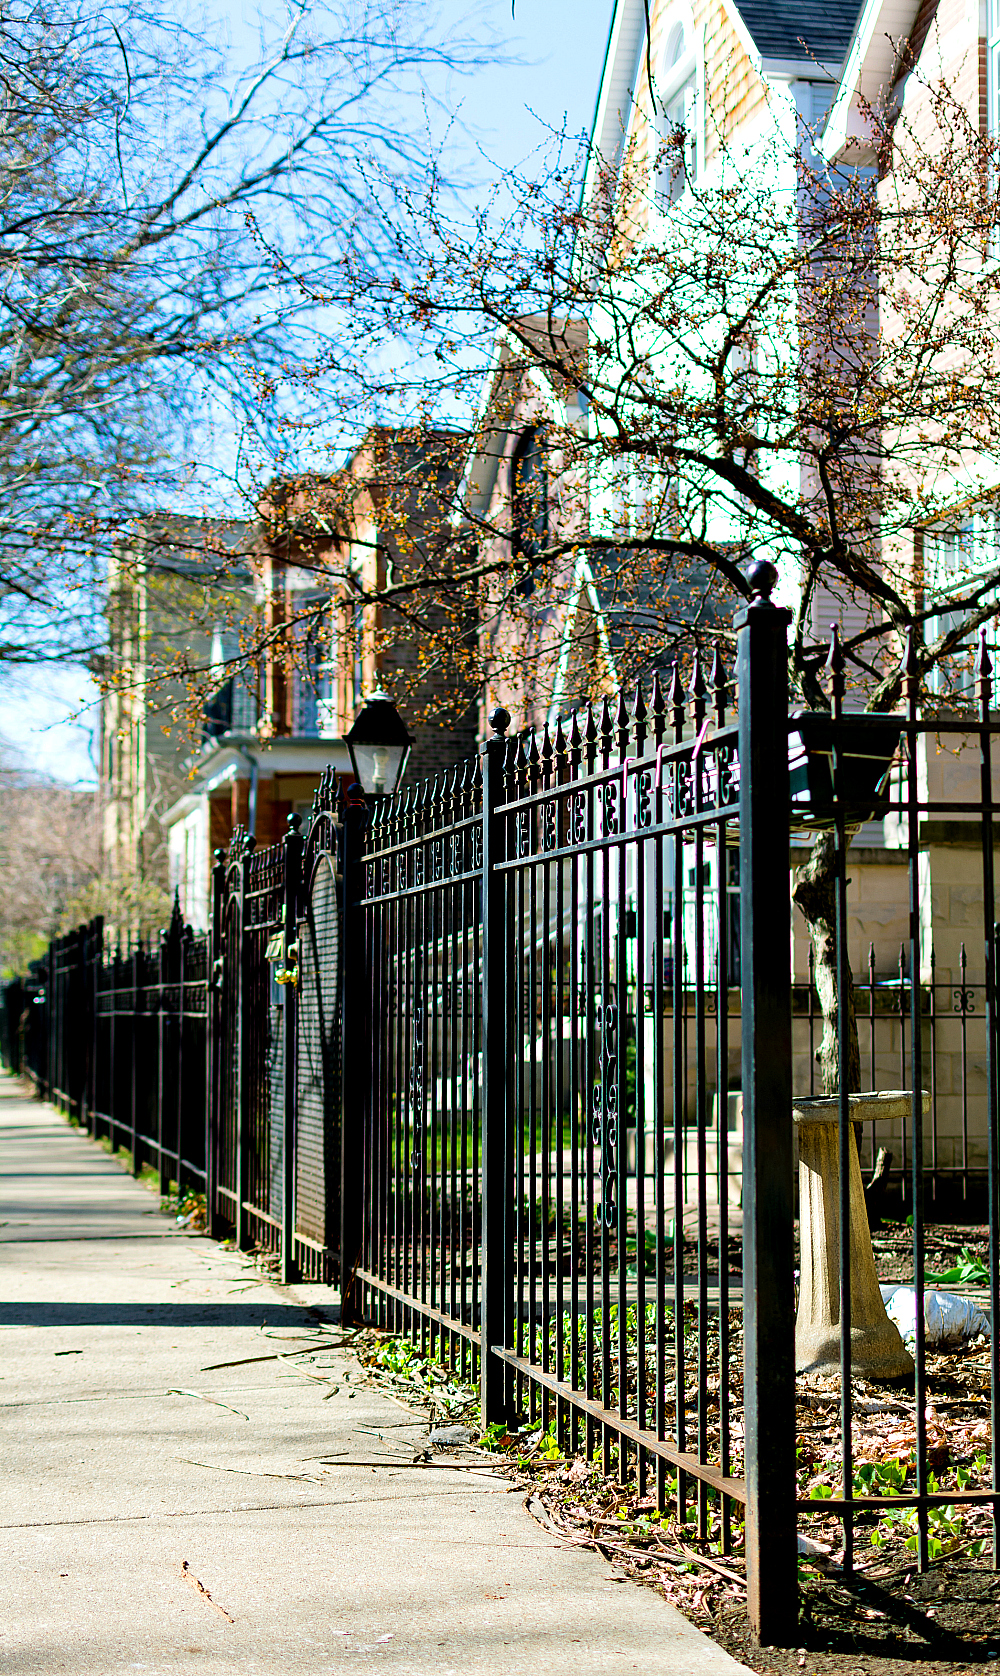 Iron Fences in Chicago Lakeview Neighborhood